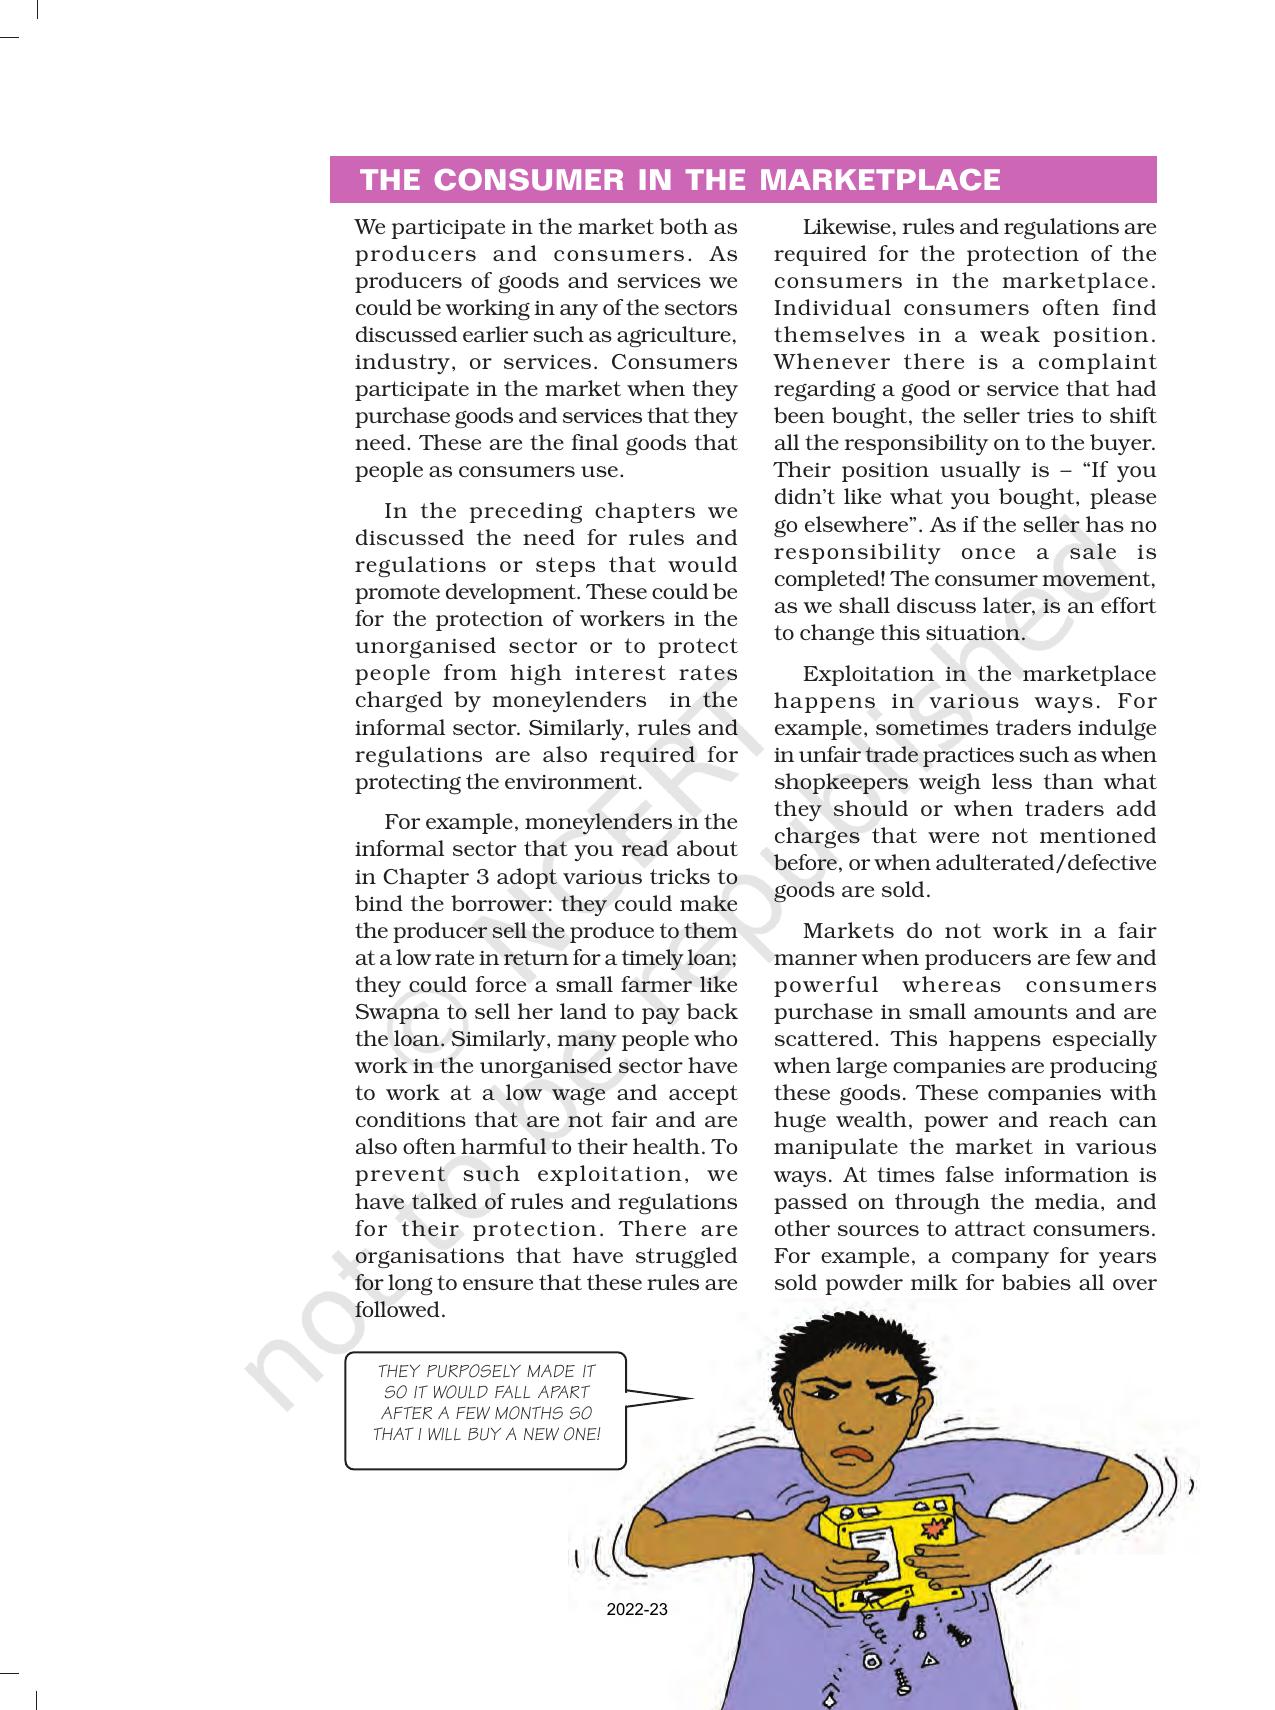 NCERT Book for Class 10 Economics Chapter 5 Consumer Rights - Page 3